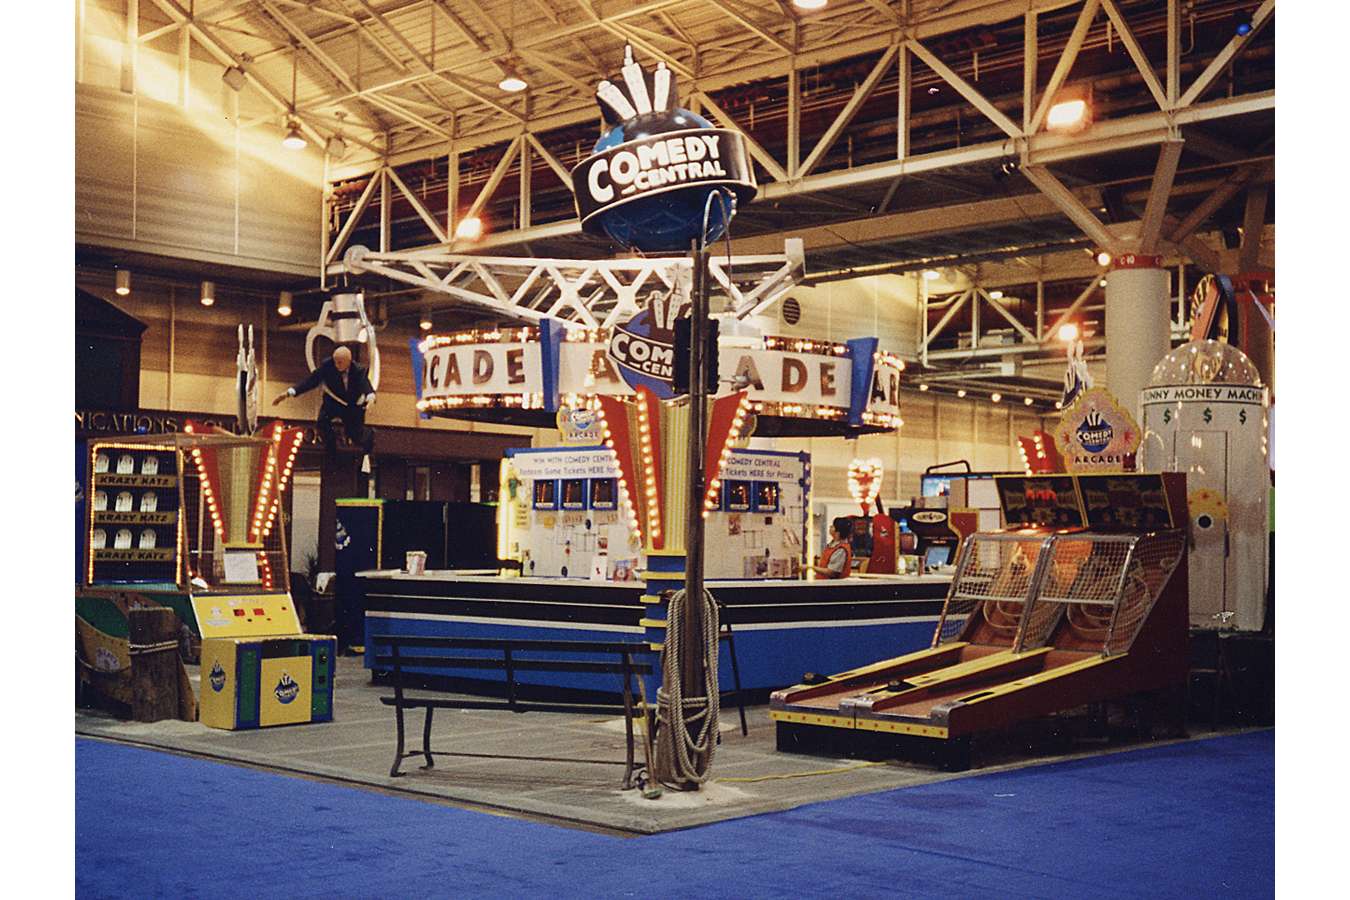 CC WSQ1 : Skee-Ball, Money-Grab, Basket-ball and Pin-ball machines scattered around booth